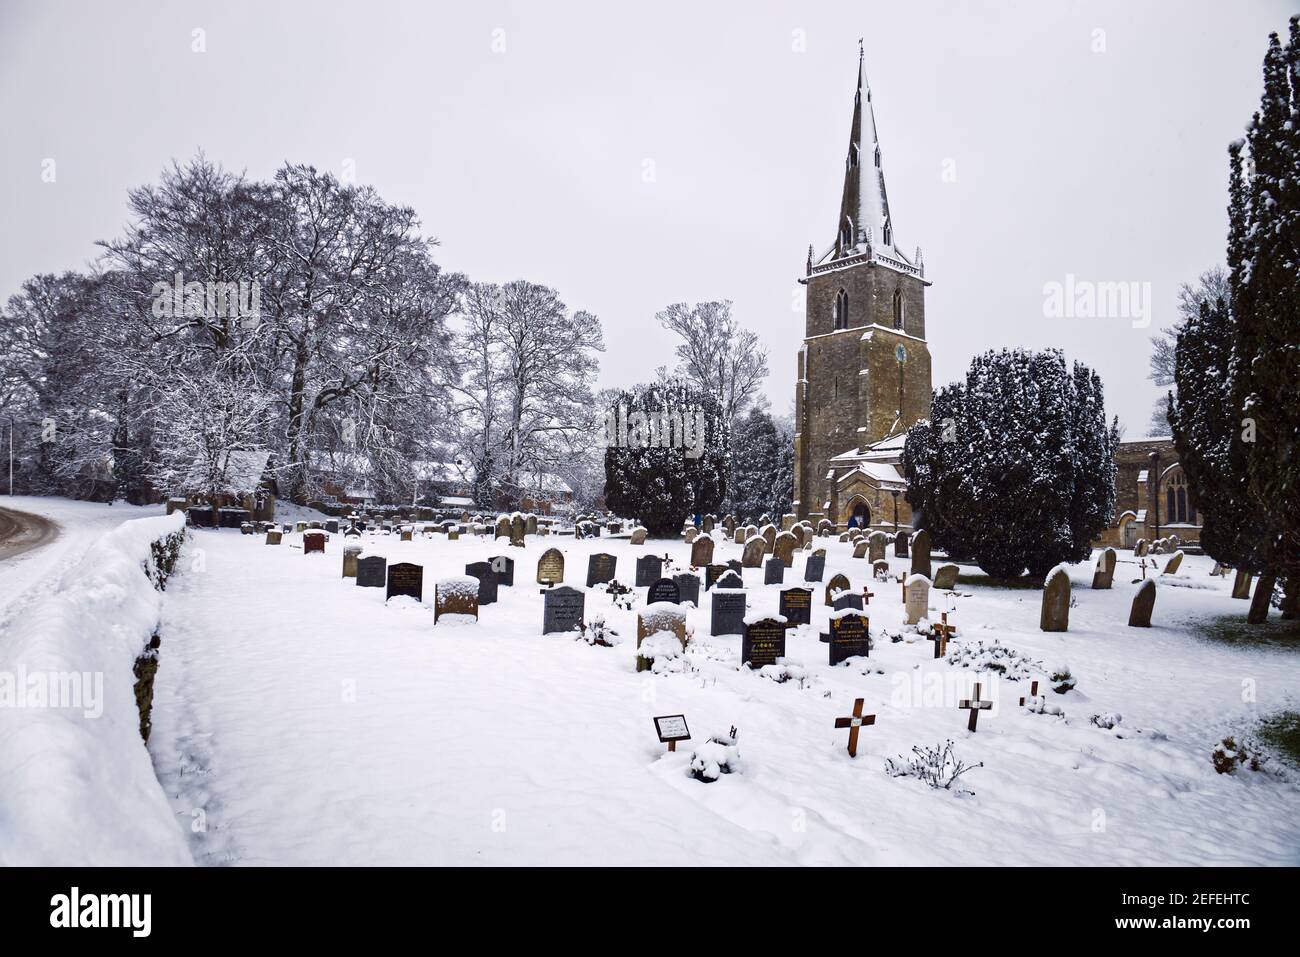 Snow scene at St Peter's Church, Sharnbrook, Bedfordshire, England, UK. Stock Photo